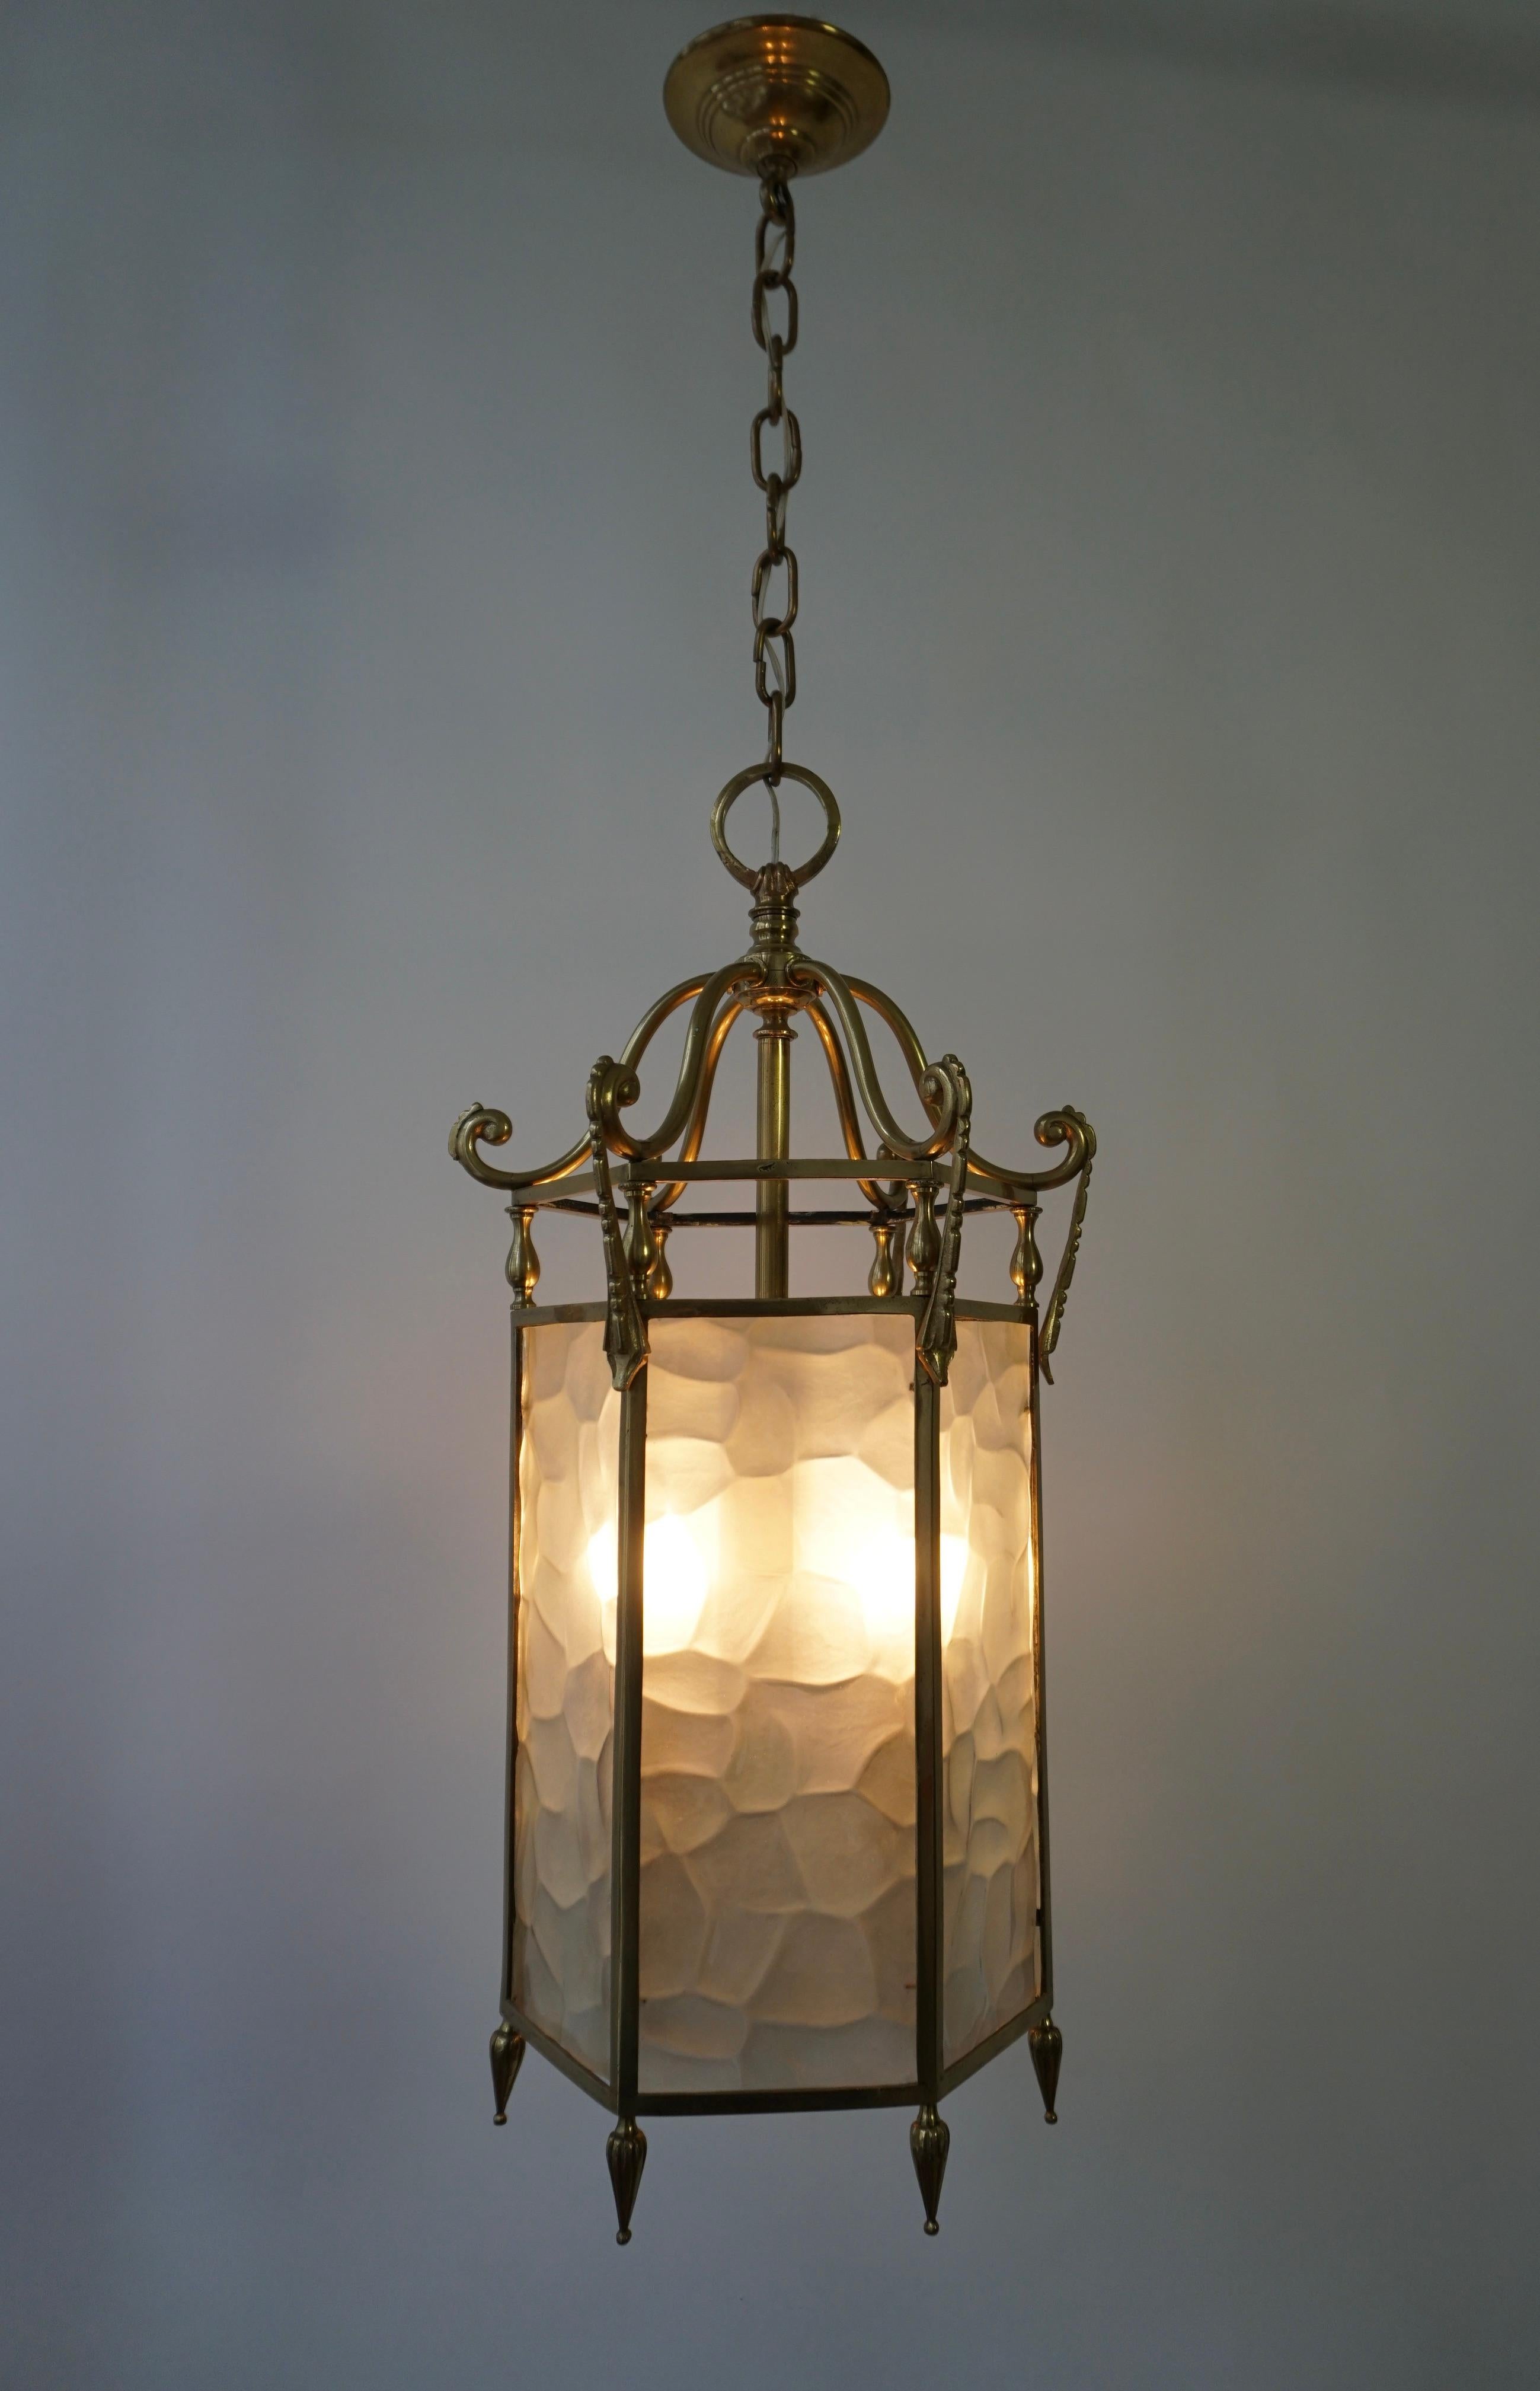 20th century pendant lantern with bronze finish with six white textured glass side panels, chain and canopy. 
Takes 3 candelabra style light bulbs. 

The lantern has three sockets for small incandescent lamps with screw base or E14 type LEDs. It is